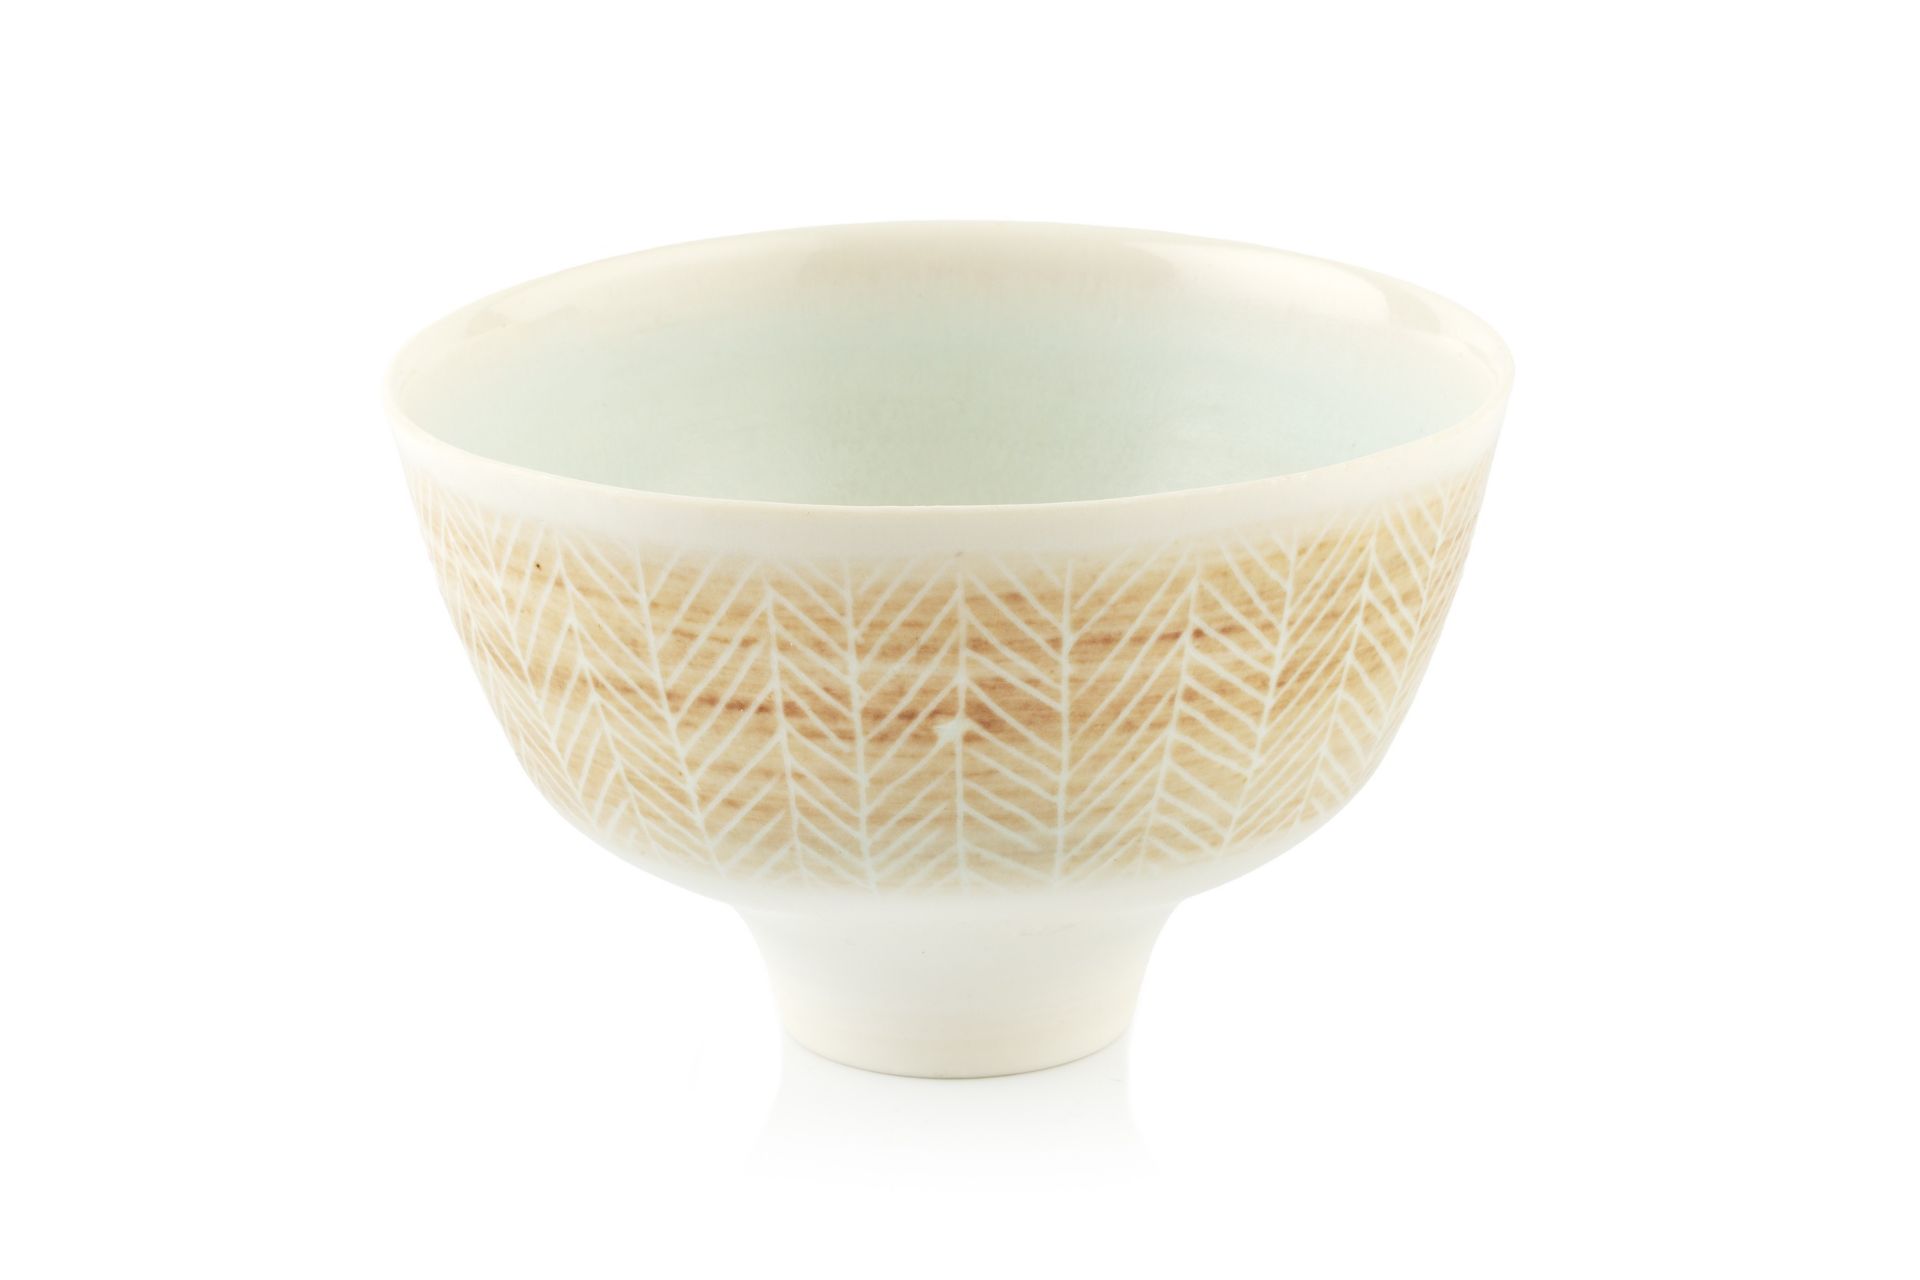 Peter Wills (b.1955) Footed bowl porcelain, with a light brown herringbone pattern signed and with